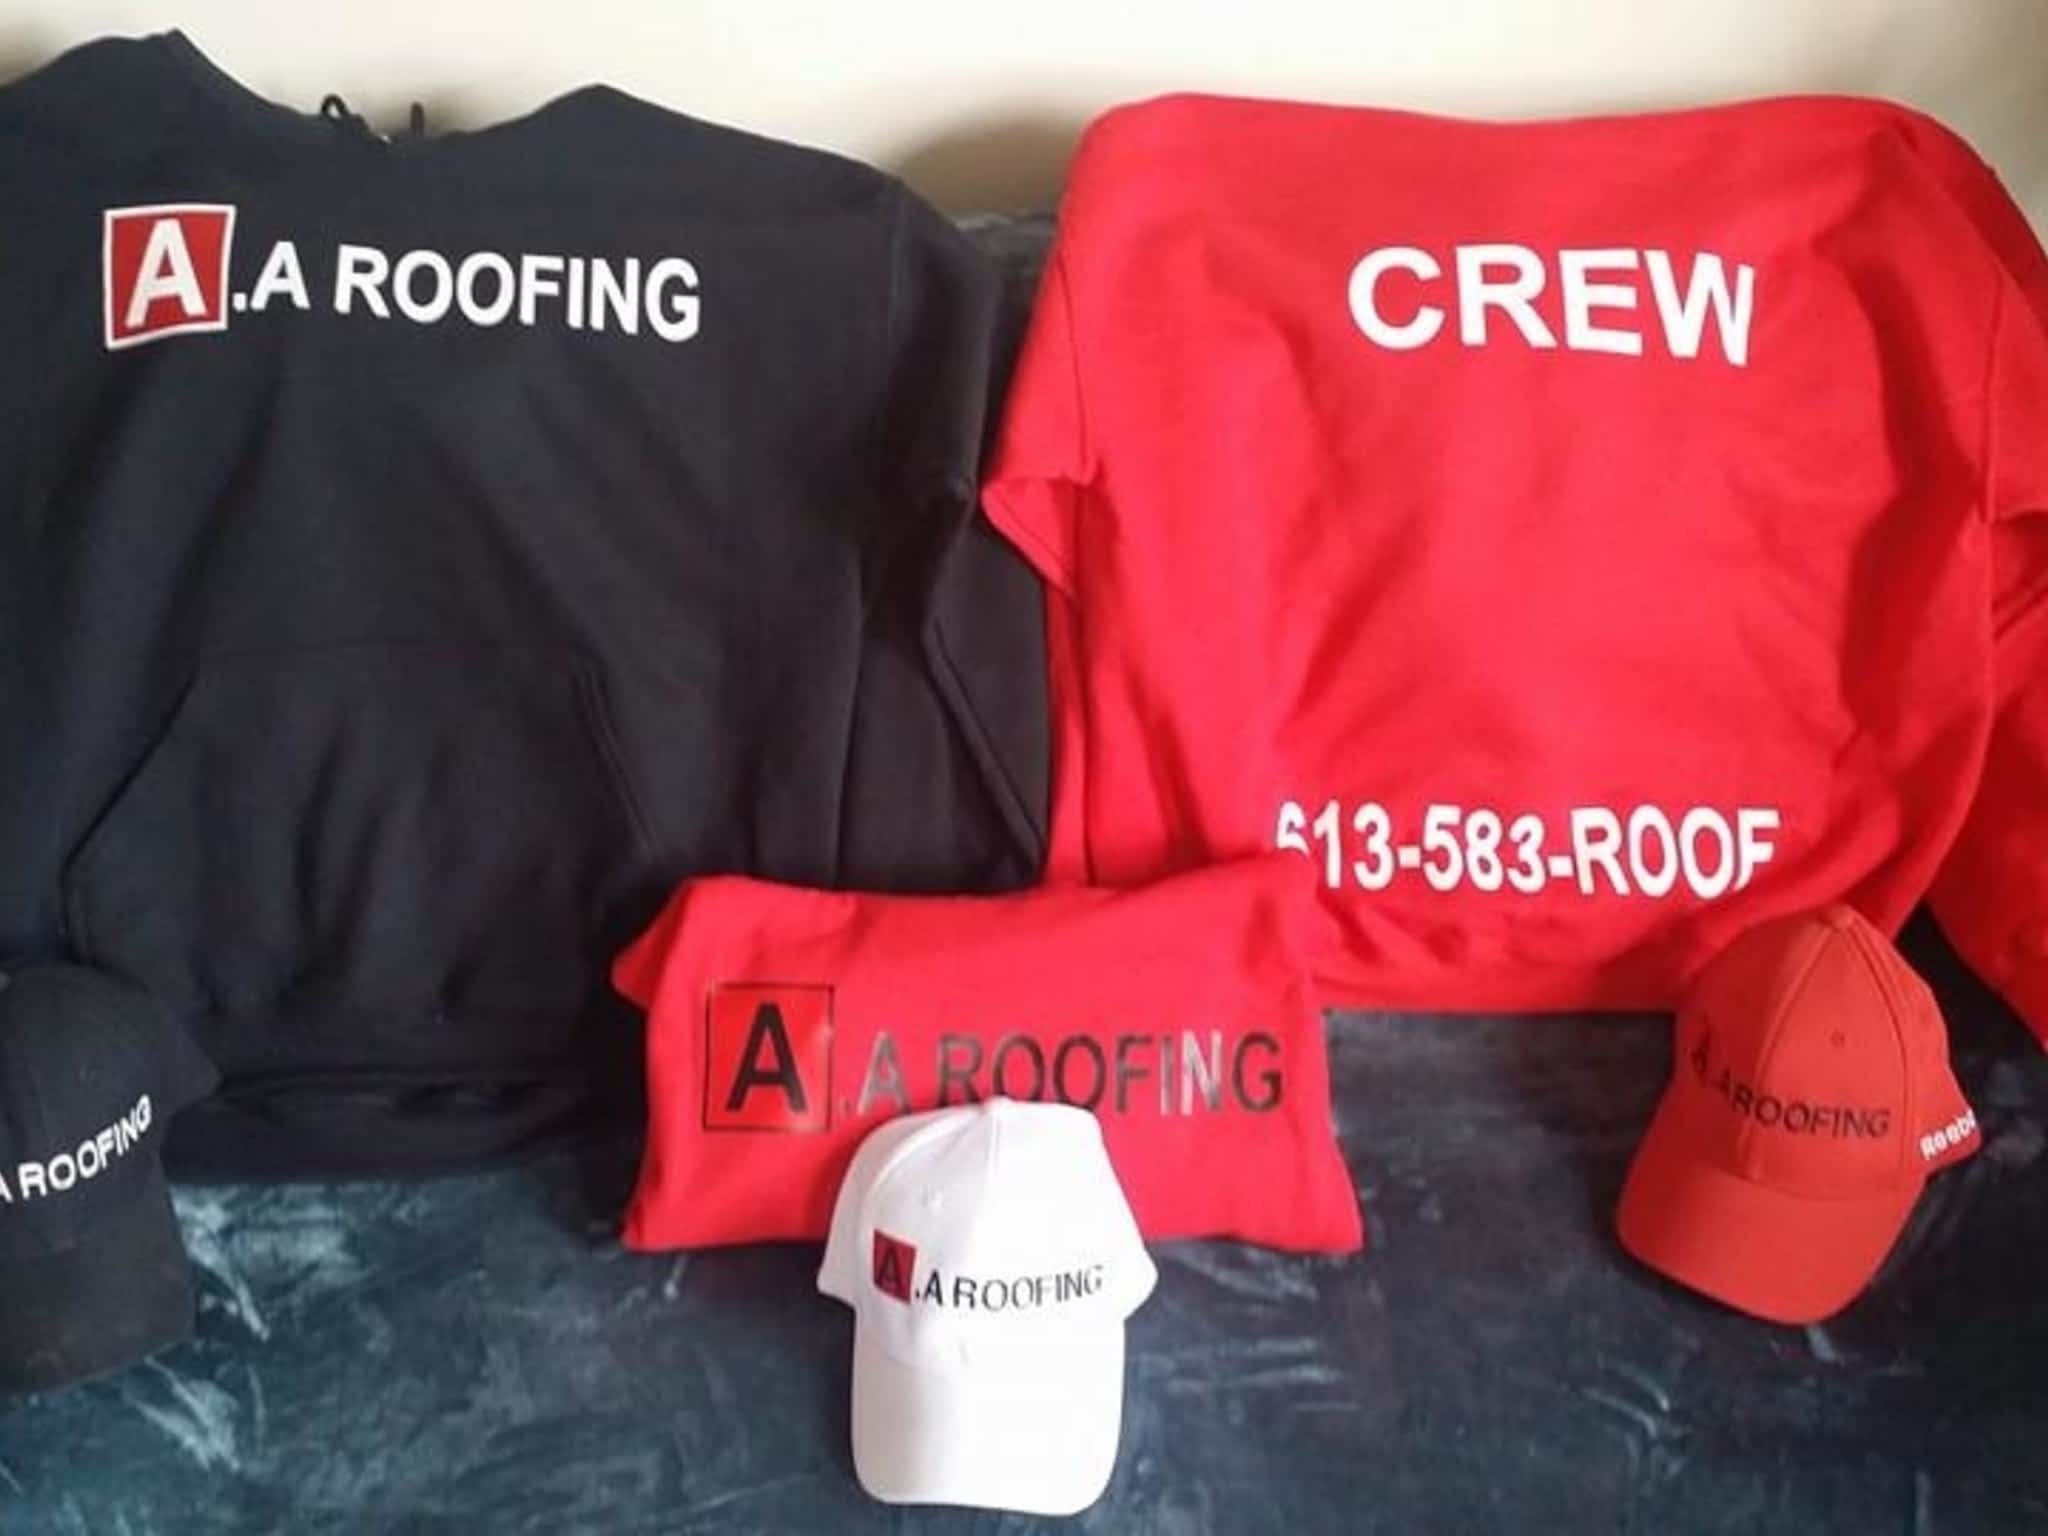 photo A.A Roofing